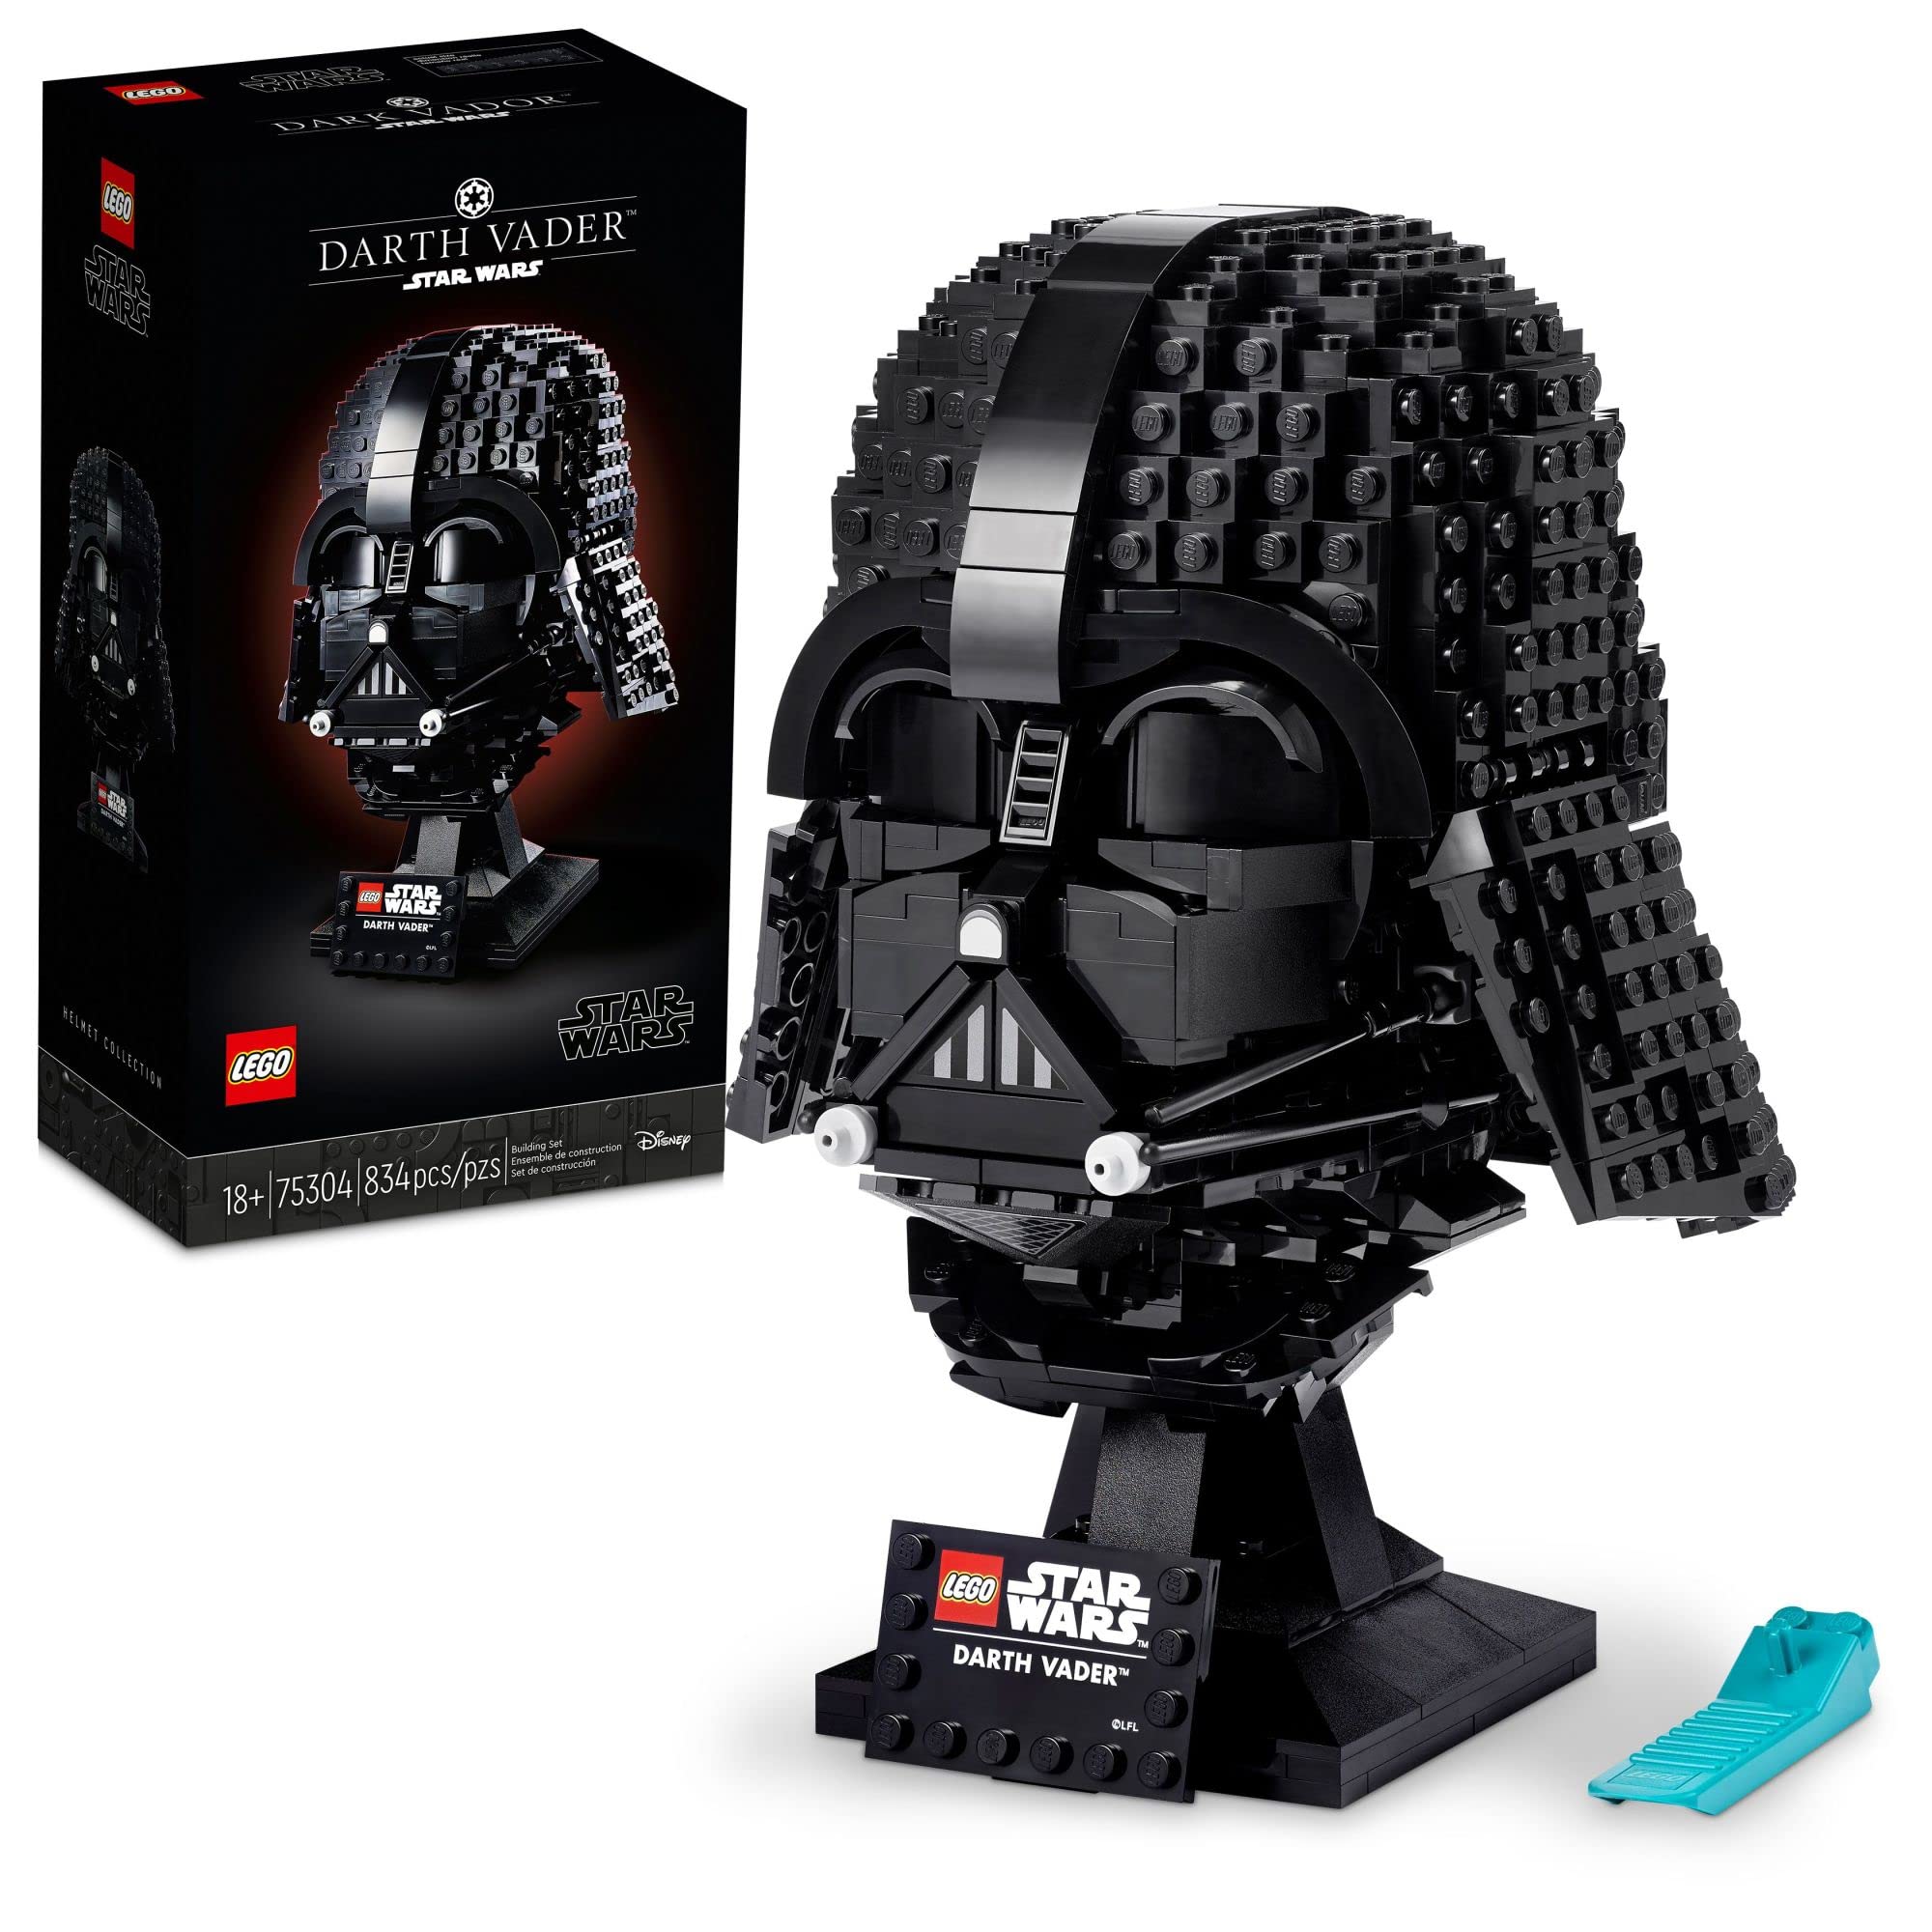 LEGO Star Wars Darth Vader Helmet 75304, Mask Display Model Kit for Adults to Build, Collectible Home Decor Model, Perfect Collectible and Back to School Gift Idea